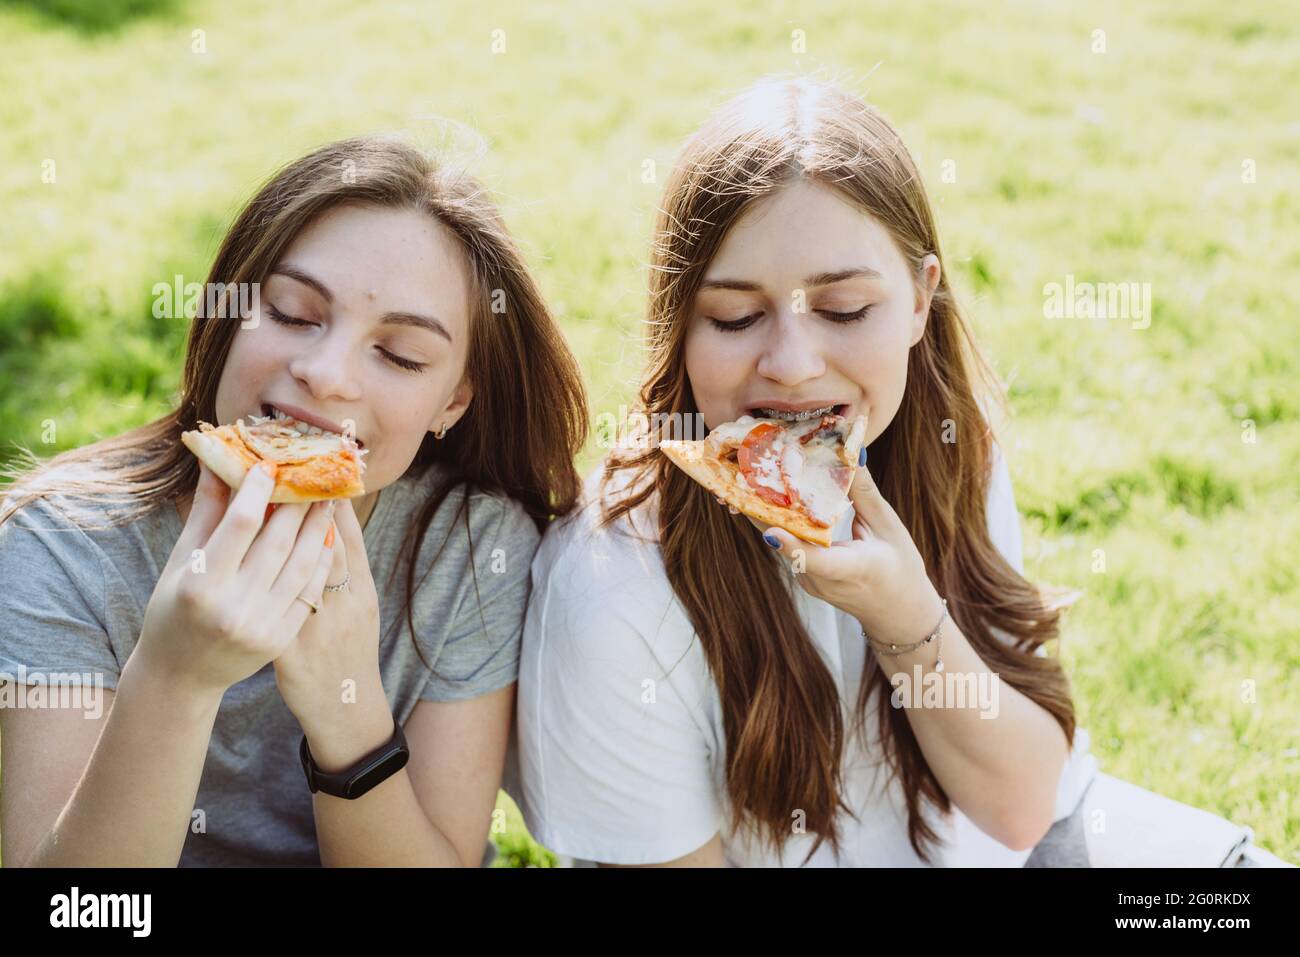 Two cheerful young teen friends in the park eating pizza. Women eat fast food. Not a healthy diet. Soft selective focus. Stock Photo